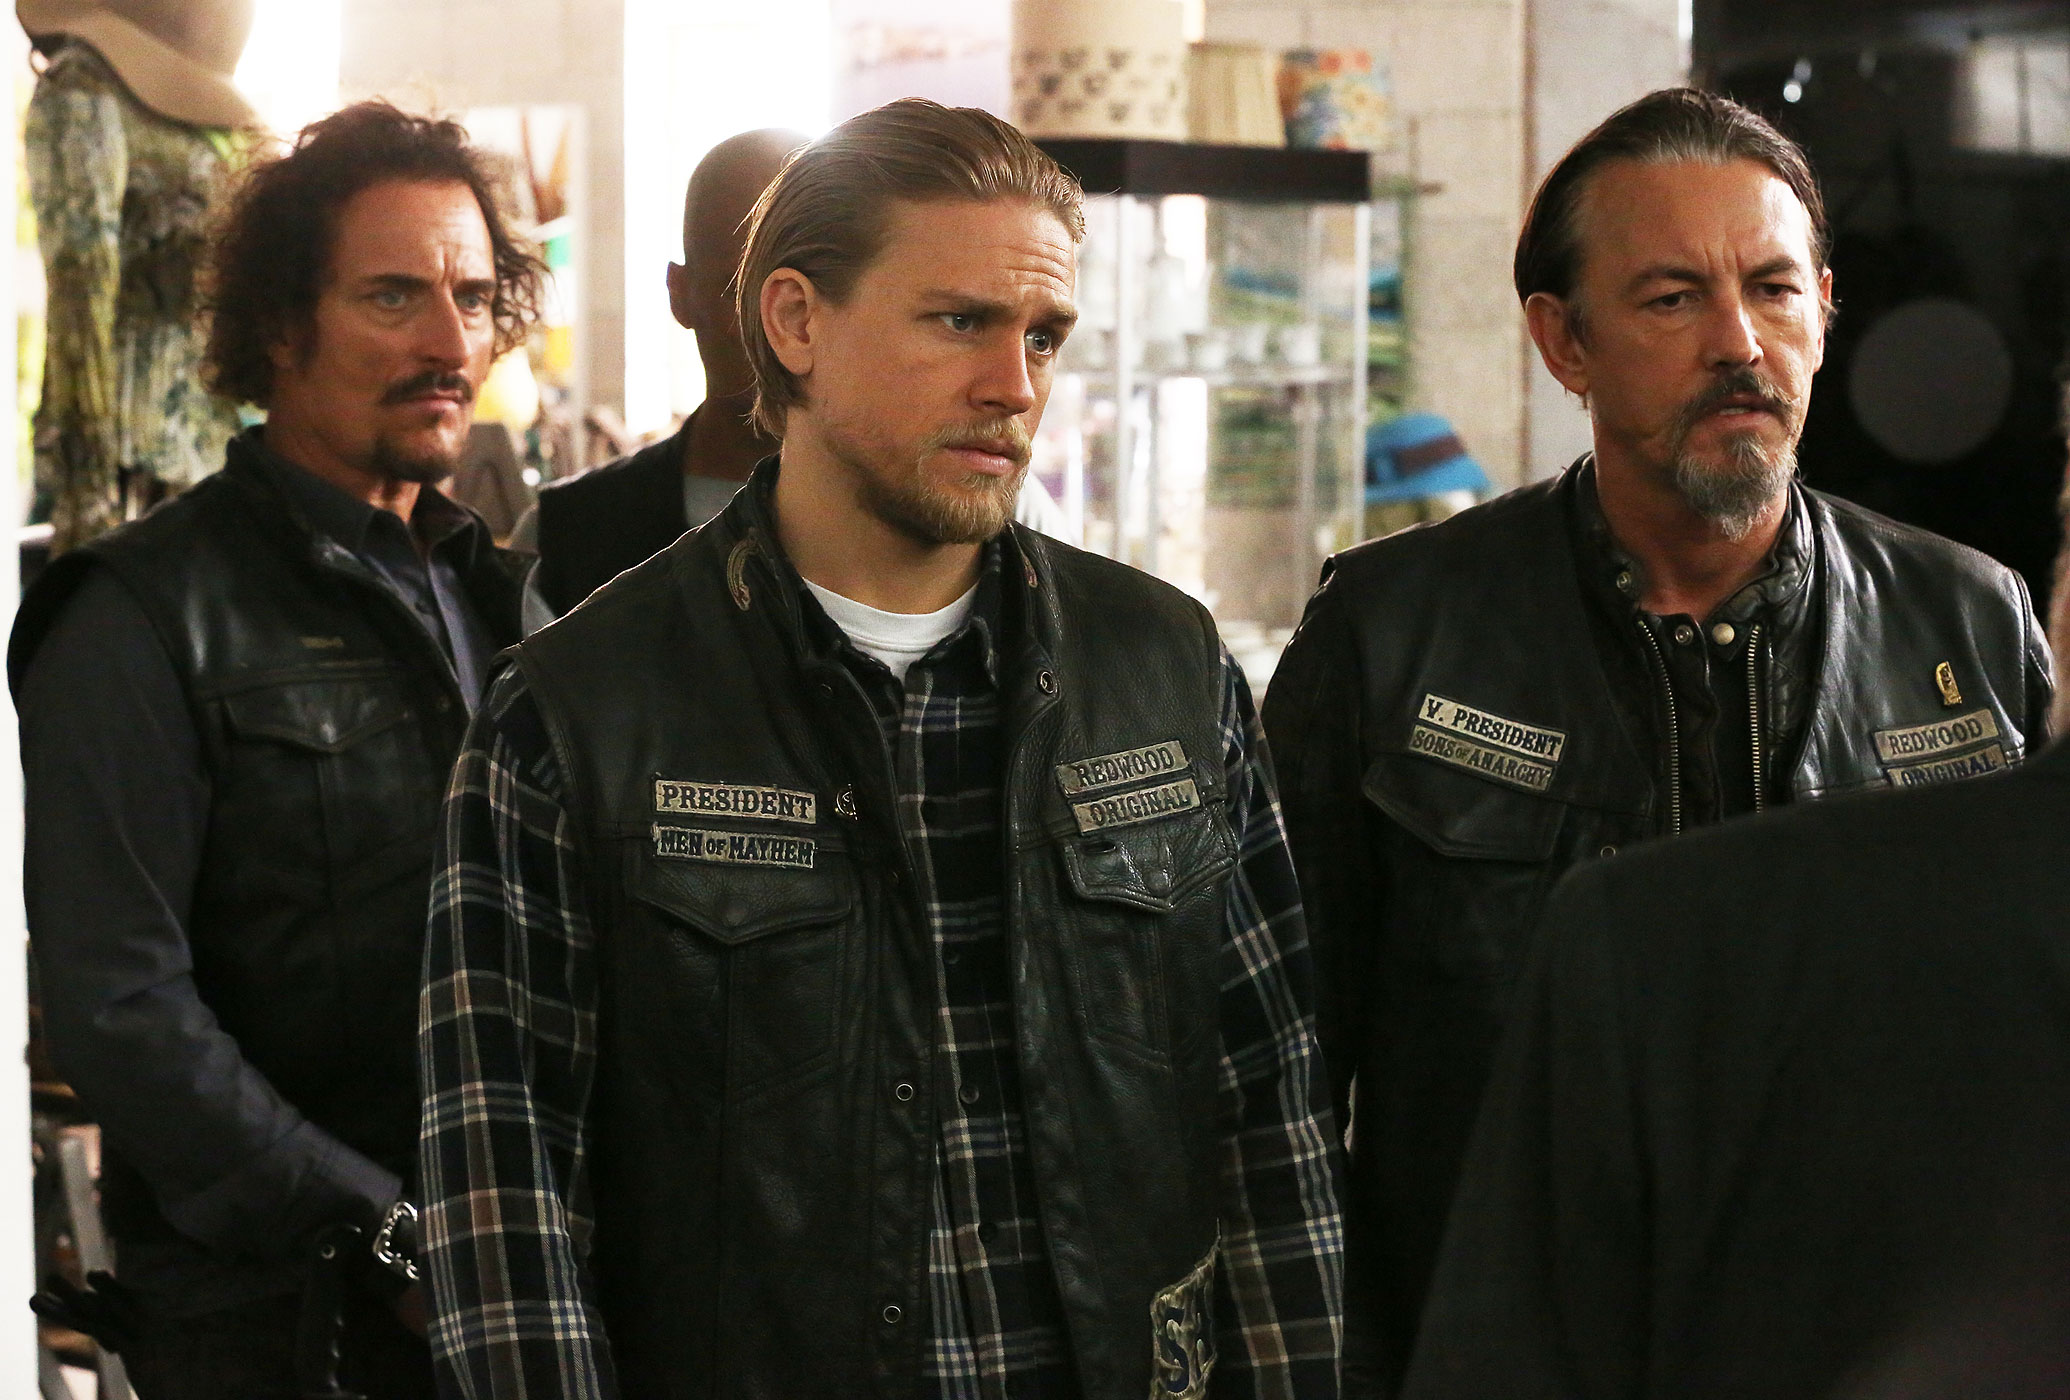 From left to right: Kim Coates as Tig Trager, Charlie Hunnam as Jax Teller, Tommy Flanagan as Chibs Telford in <i>Sons of Anarchy</i> (FX)